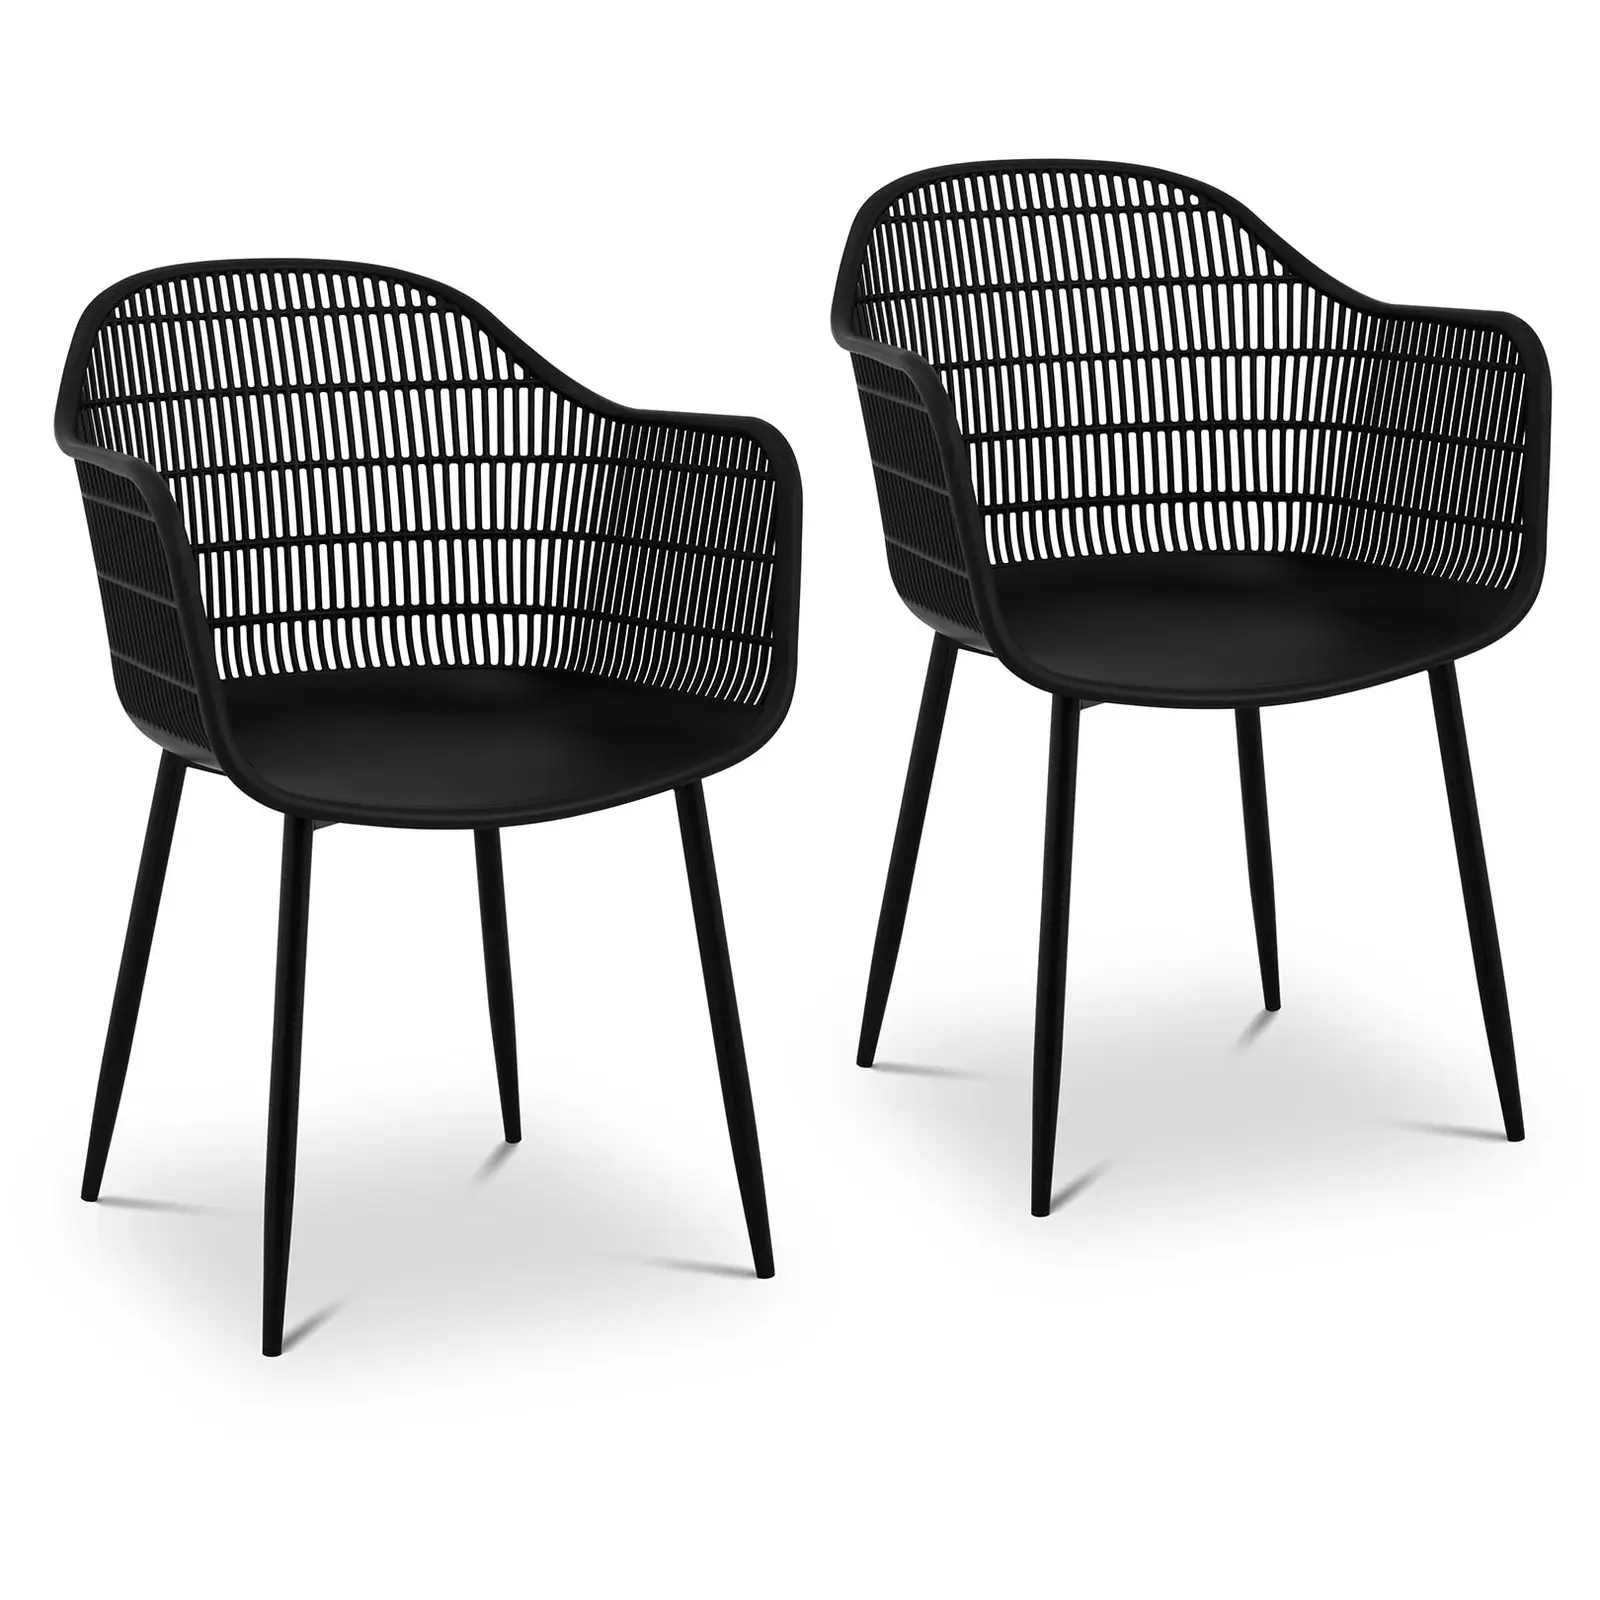 Chair - set of 2 - up to 150 kg - seat 45 x 44 cm - black